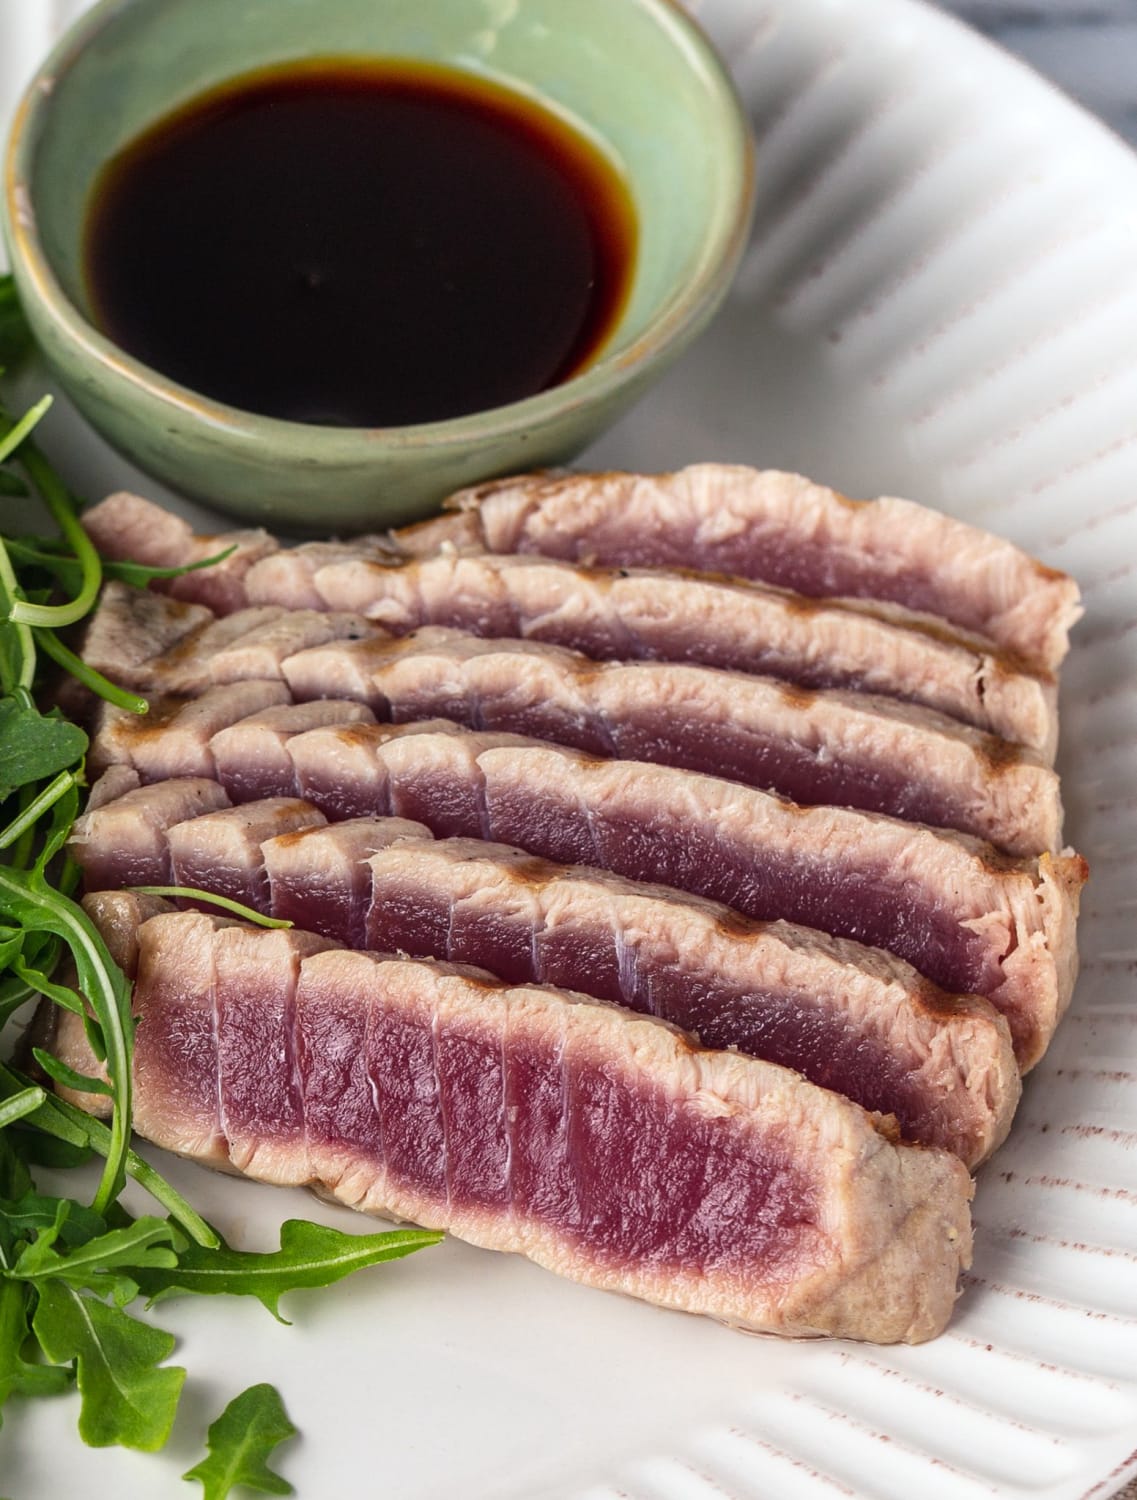 While it may seem like a complicated restaurant dish, grilled tuna steak is quite simple to tackle at home: